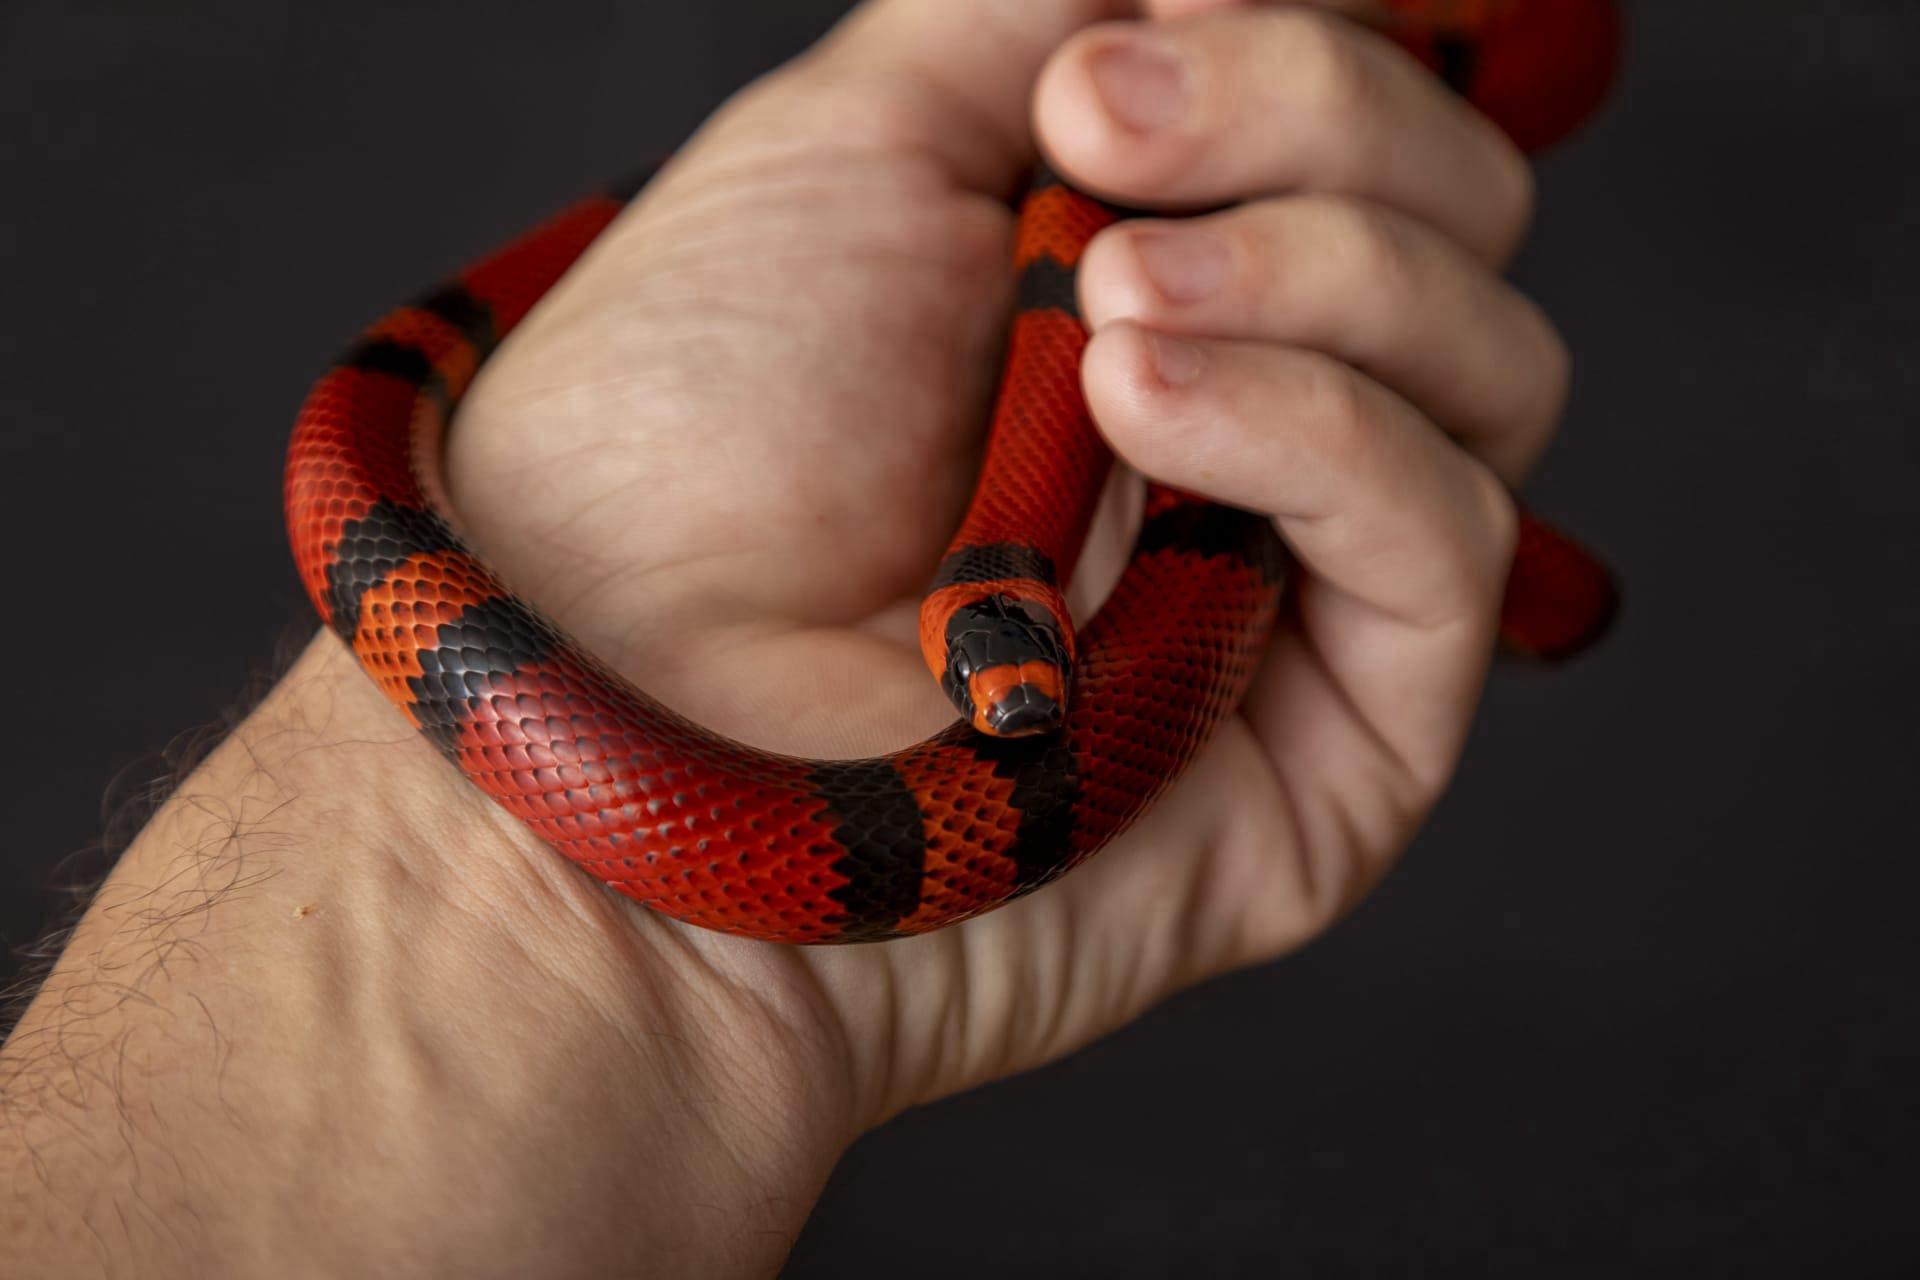 King snake pictures